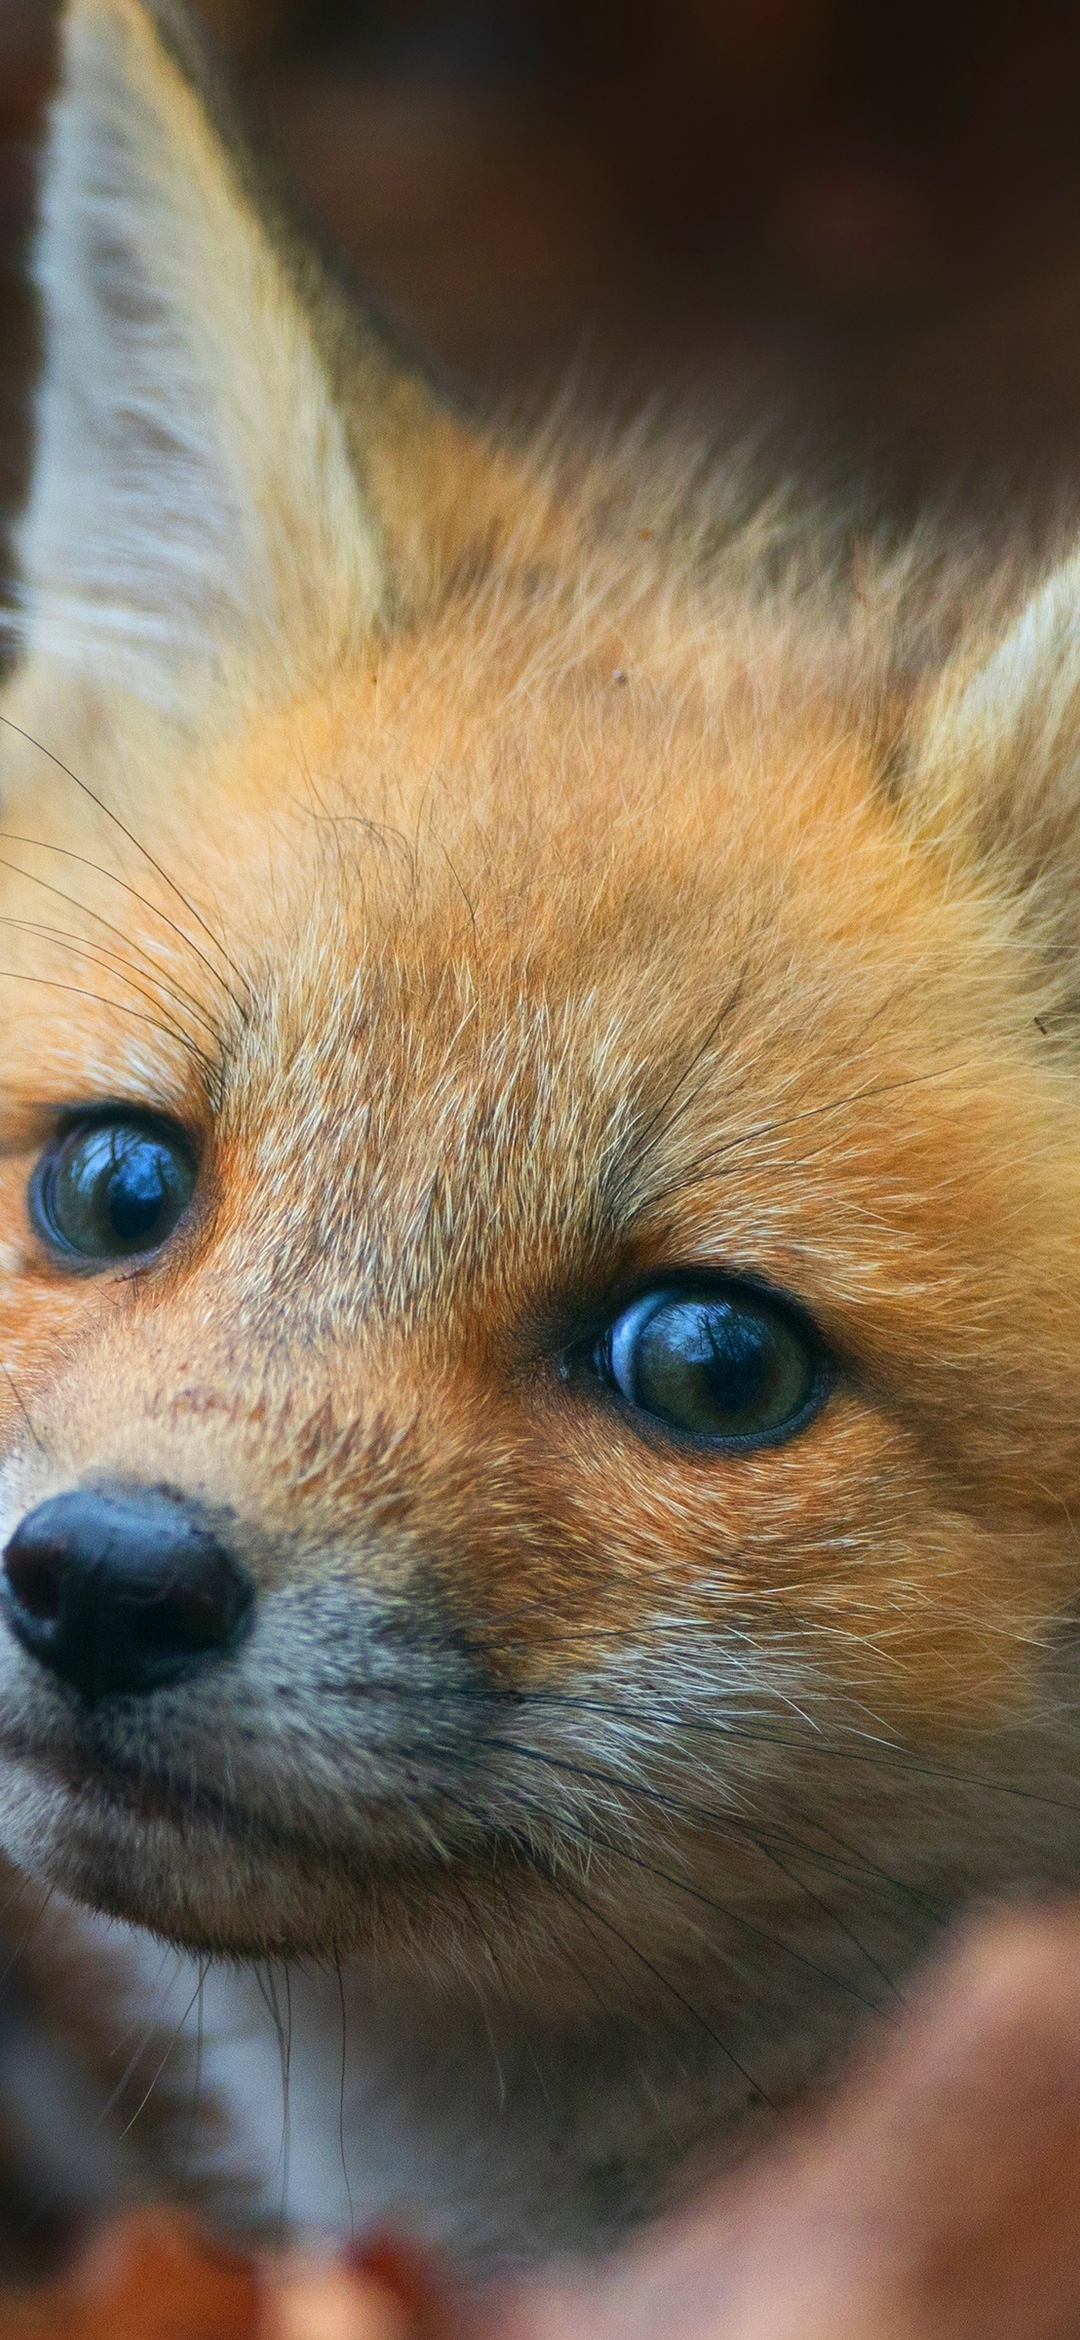 Image: Cub, fox, red, wild, snout, eyes